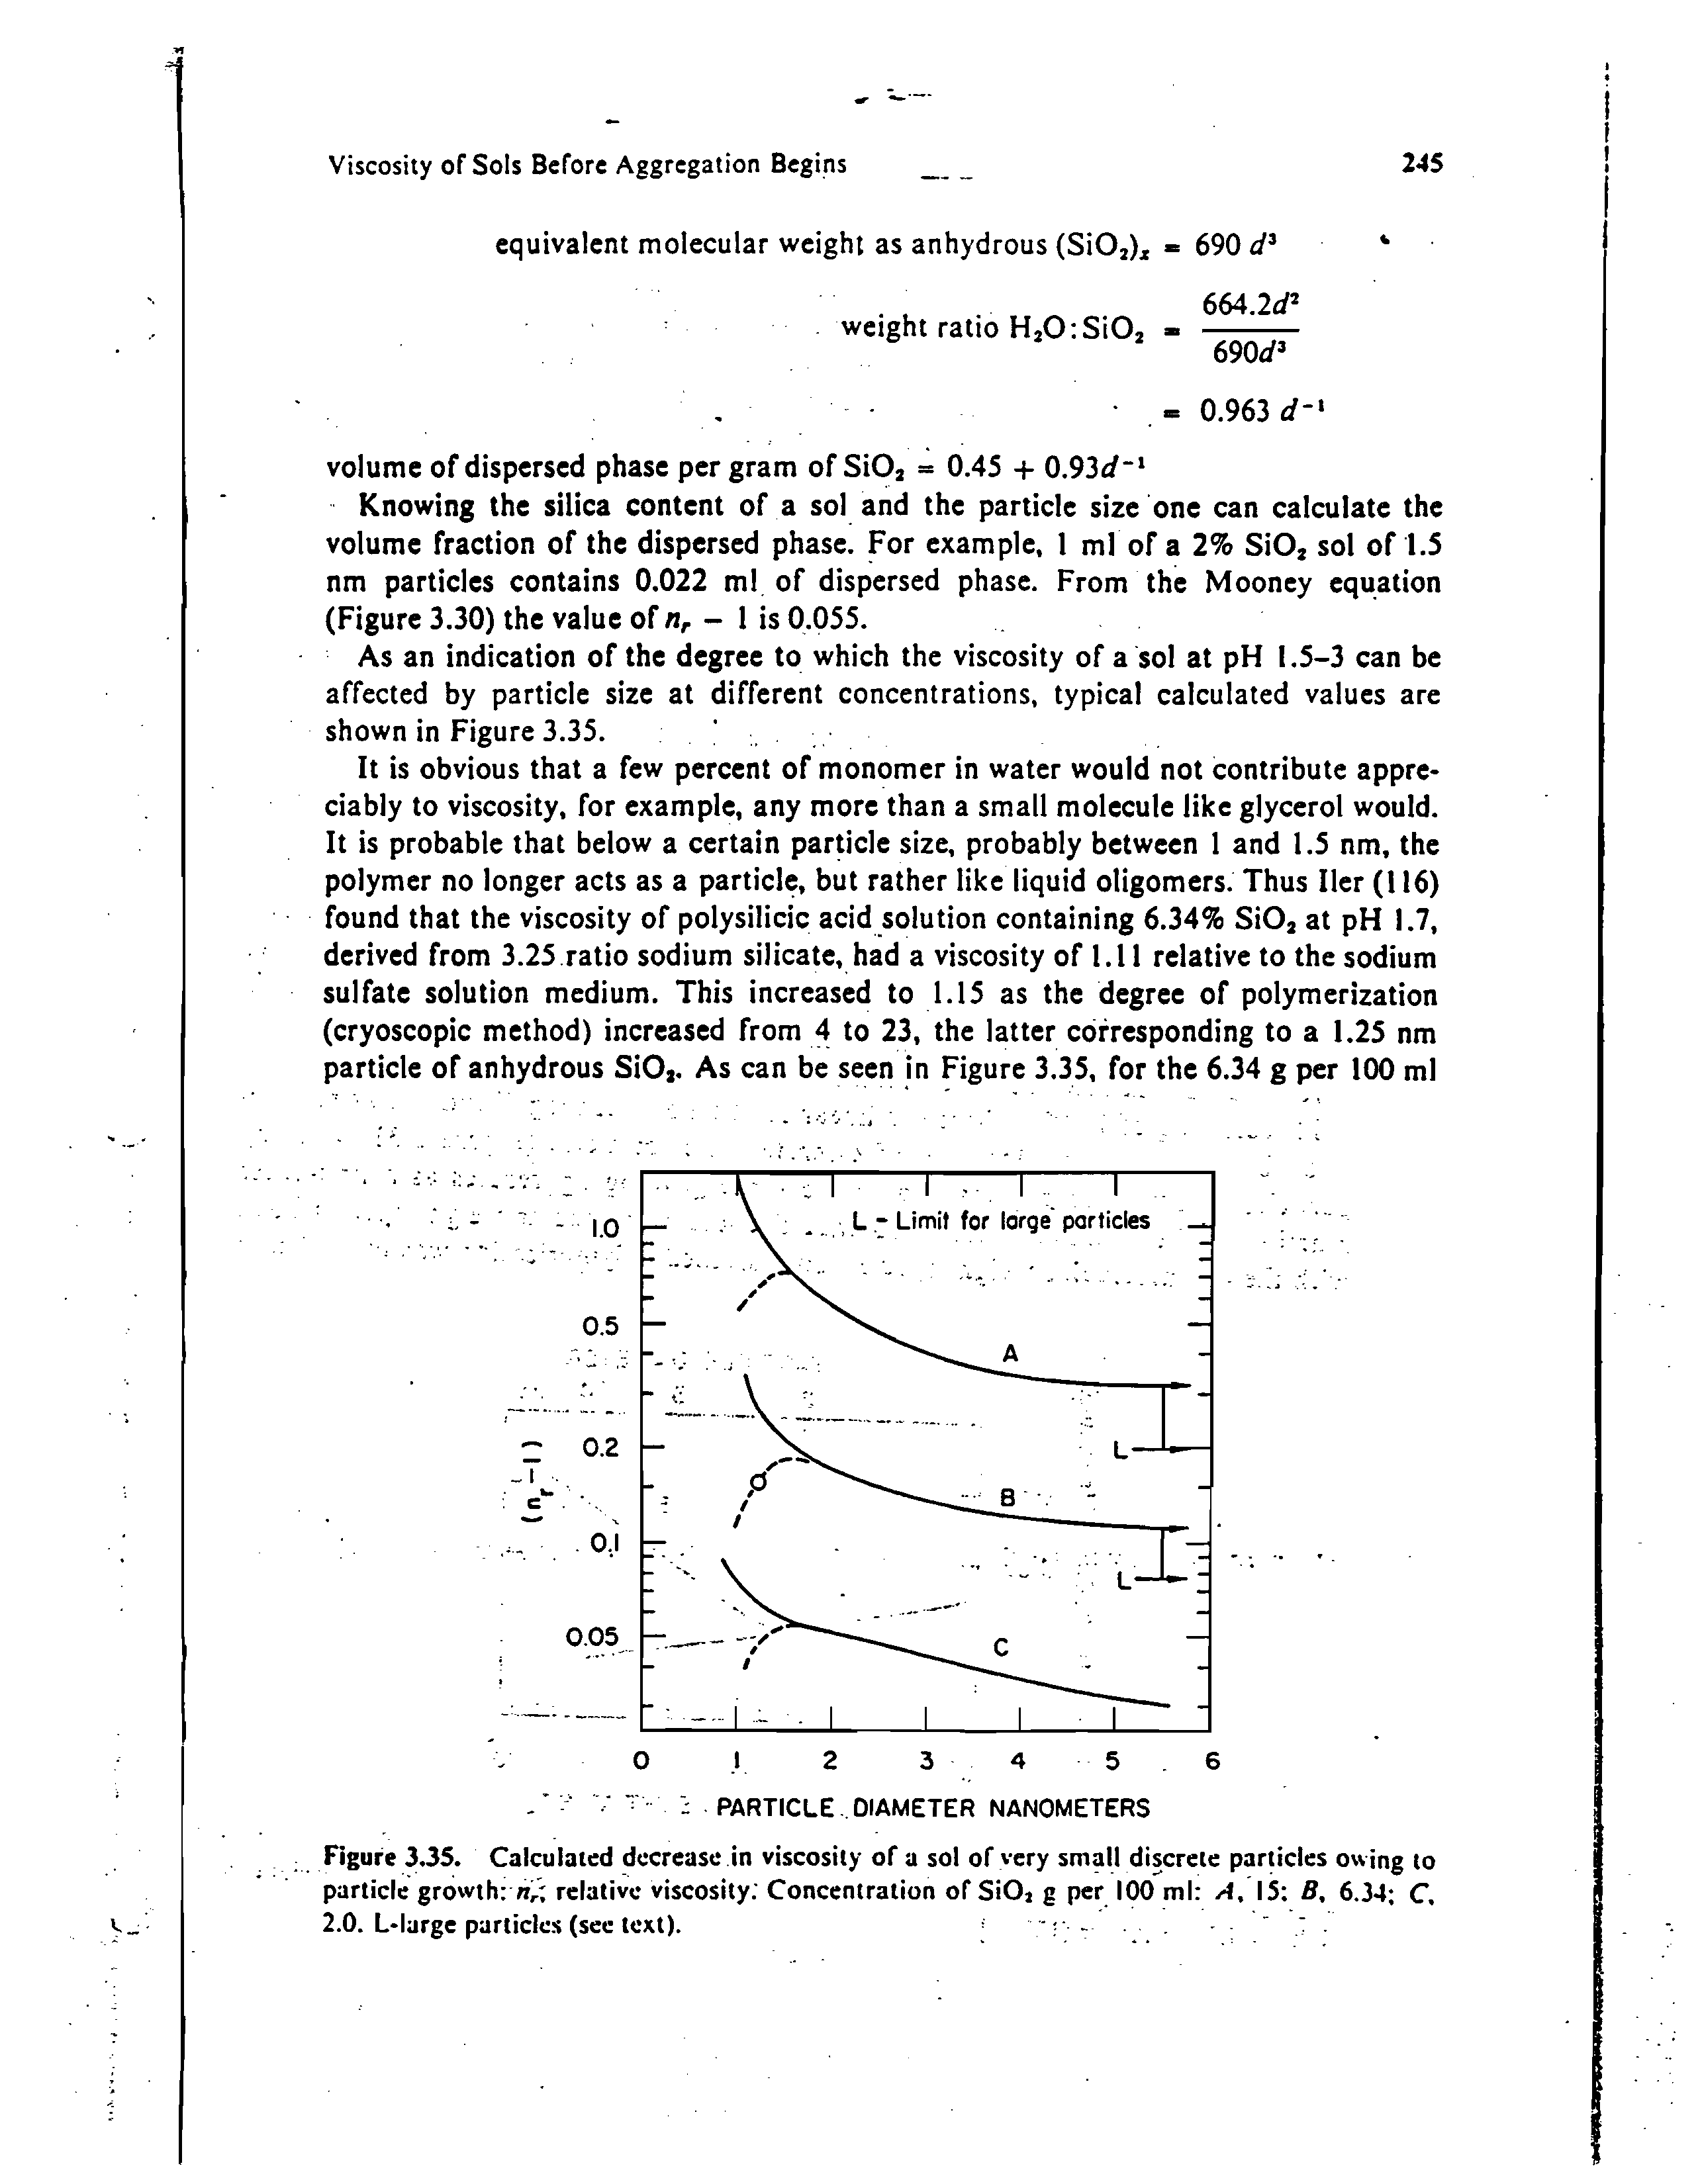 Figure 3.35. Calculated decrease in viscosity of a sol of very small discrete particles owing to particle growth relative viscosity Concentration of SiOi g per 100 ml 15 B, 6.34 C,...